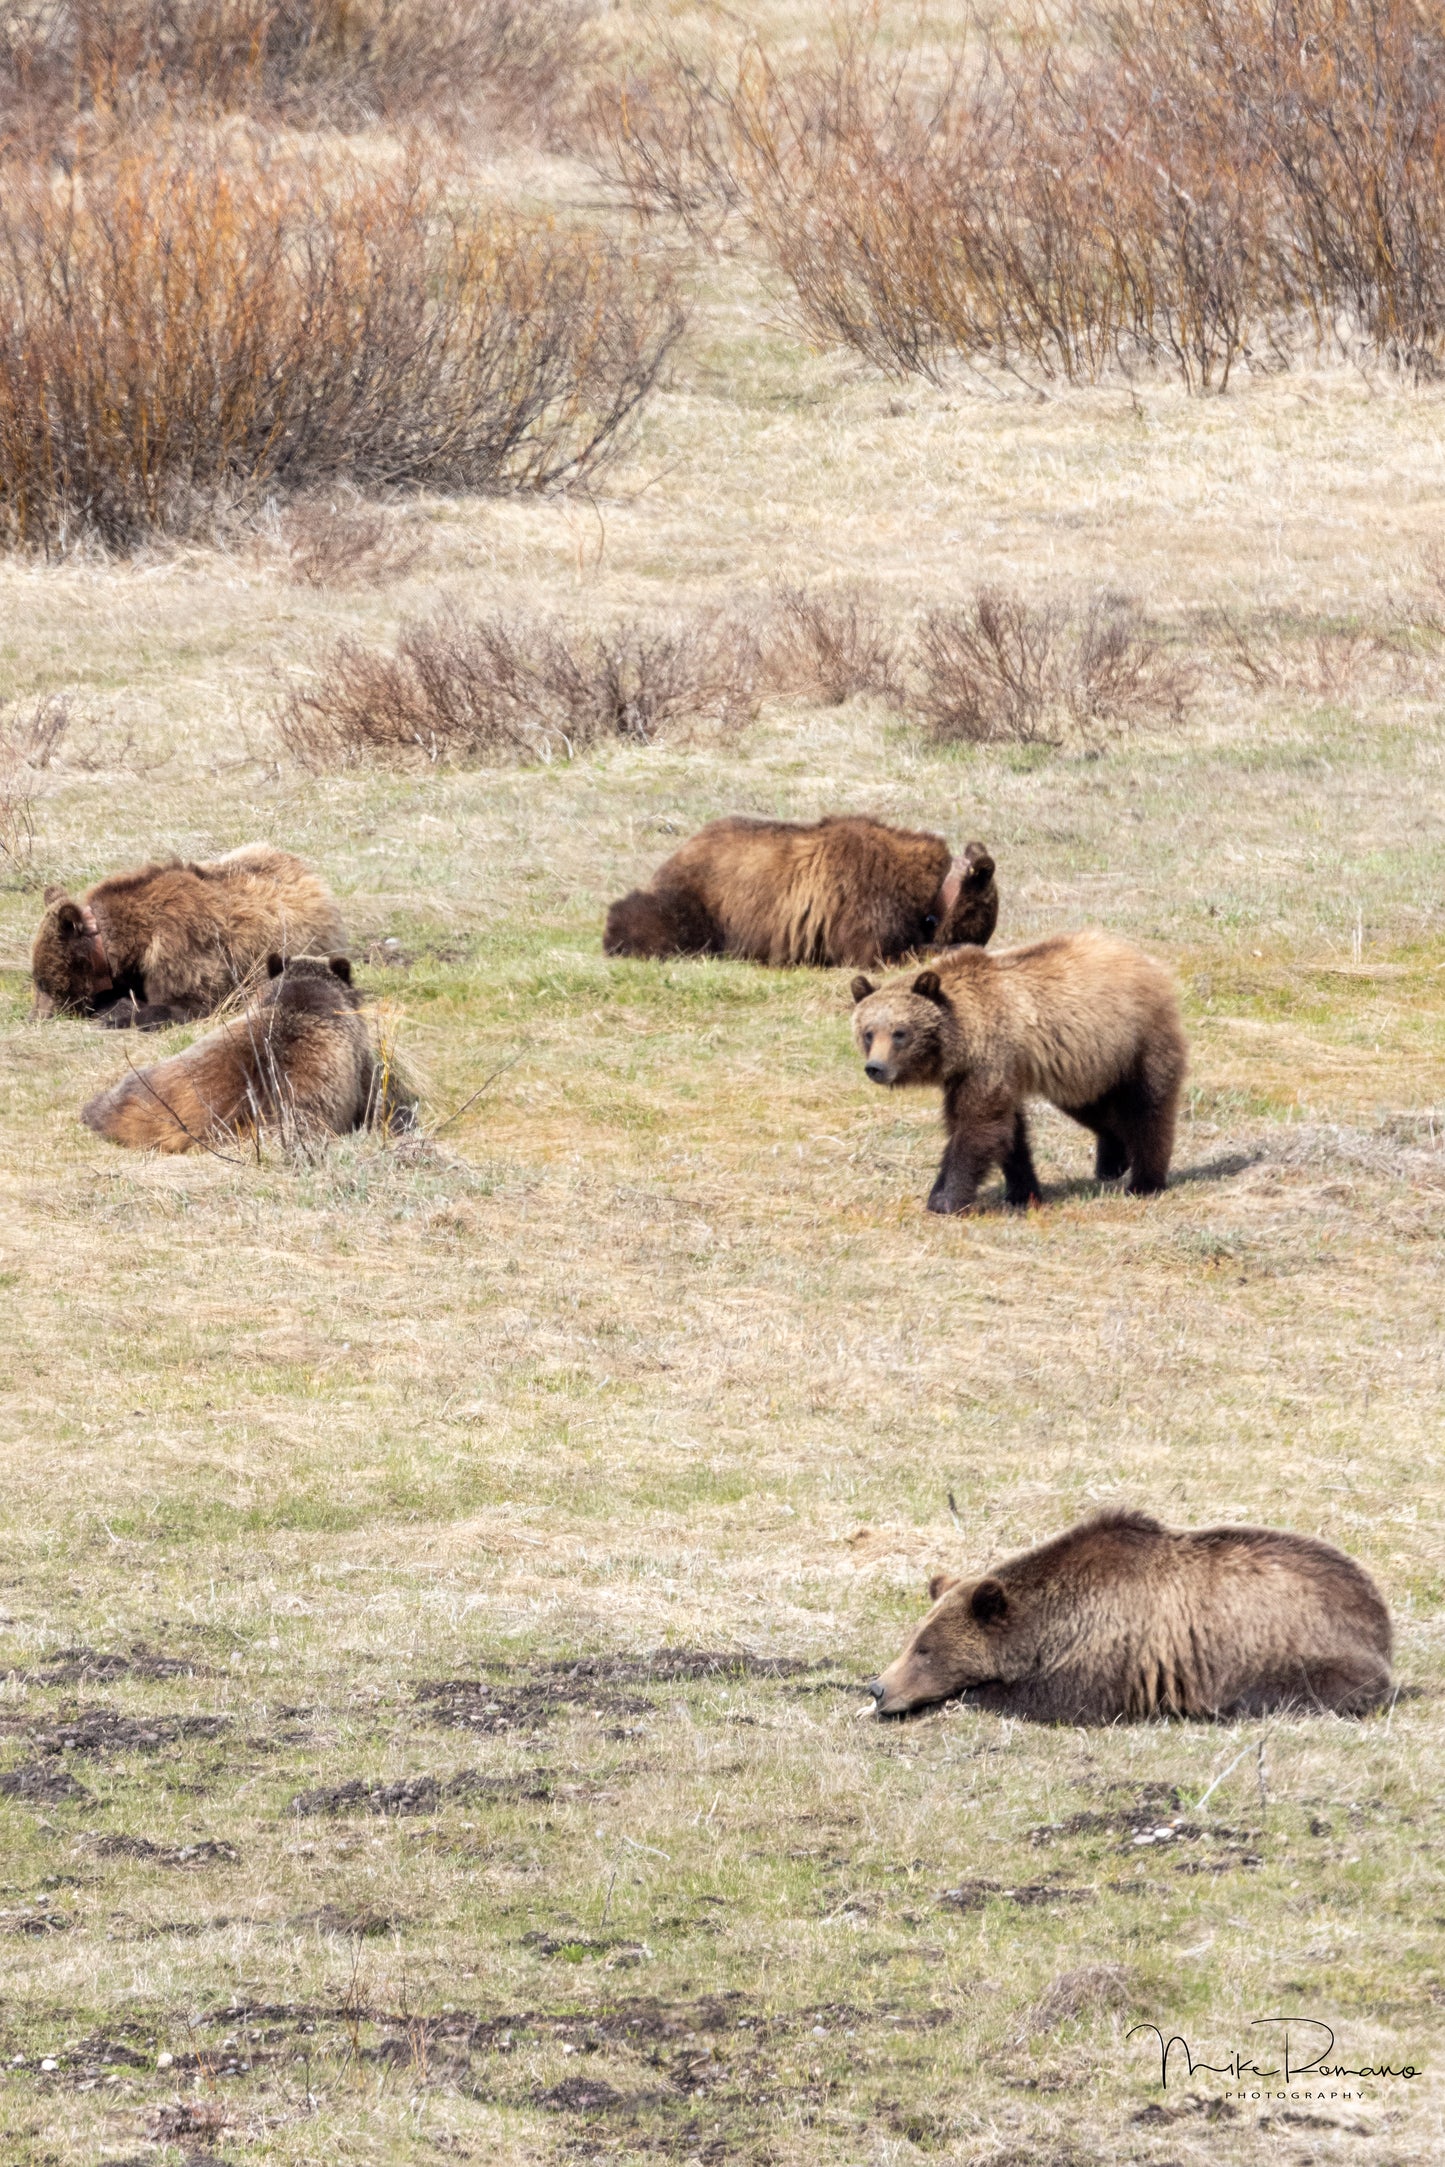 Bear 399 and her cubs, May 2022